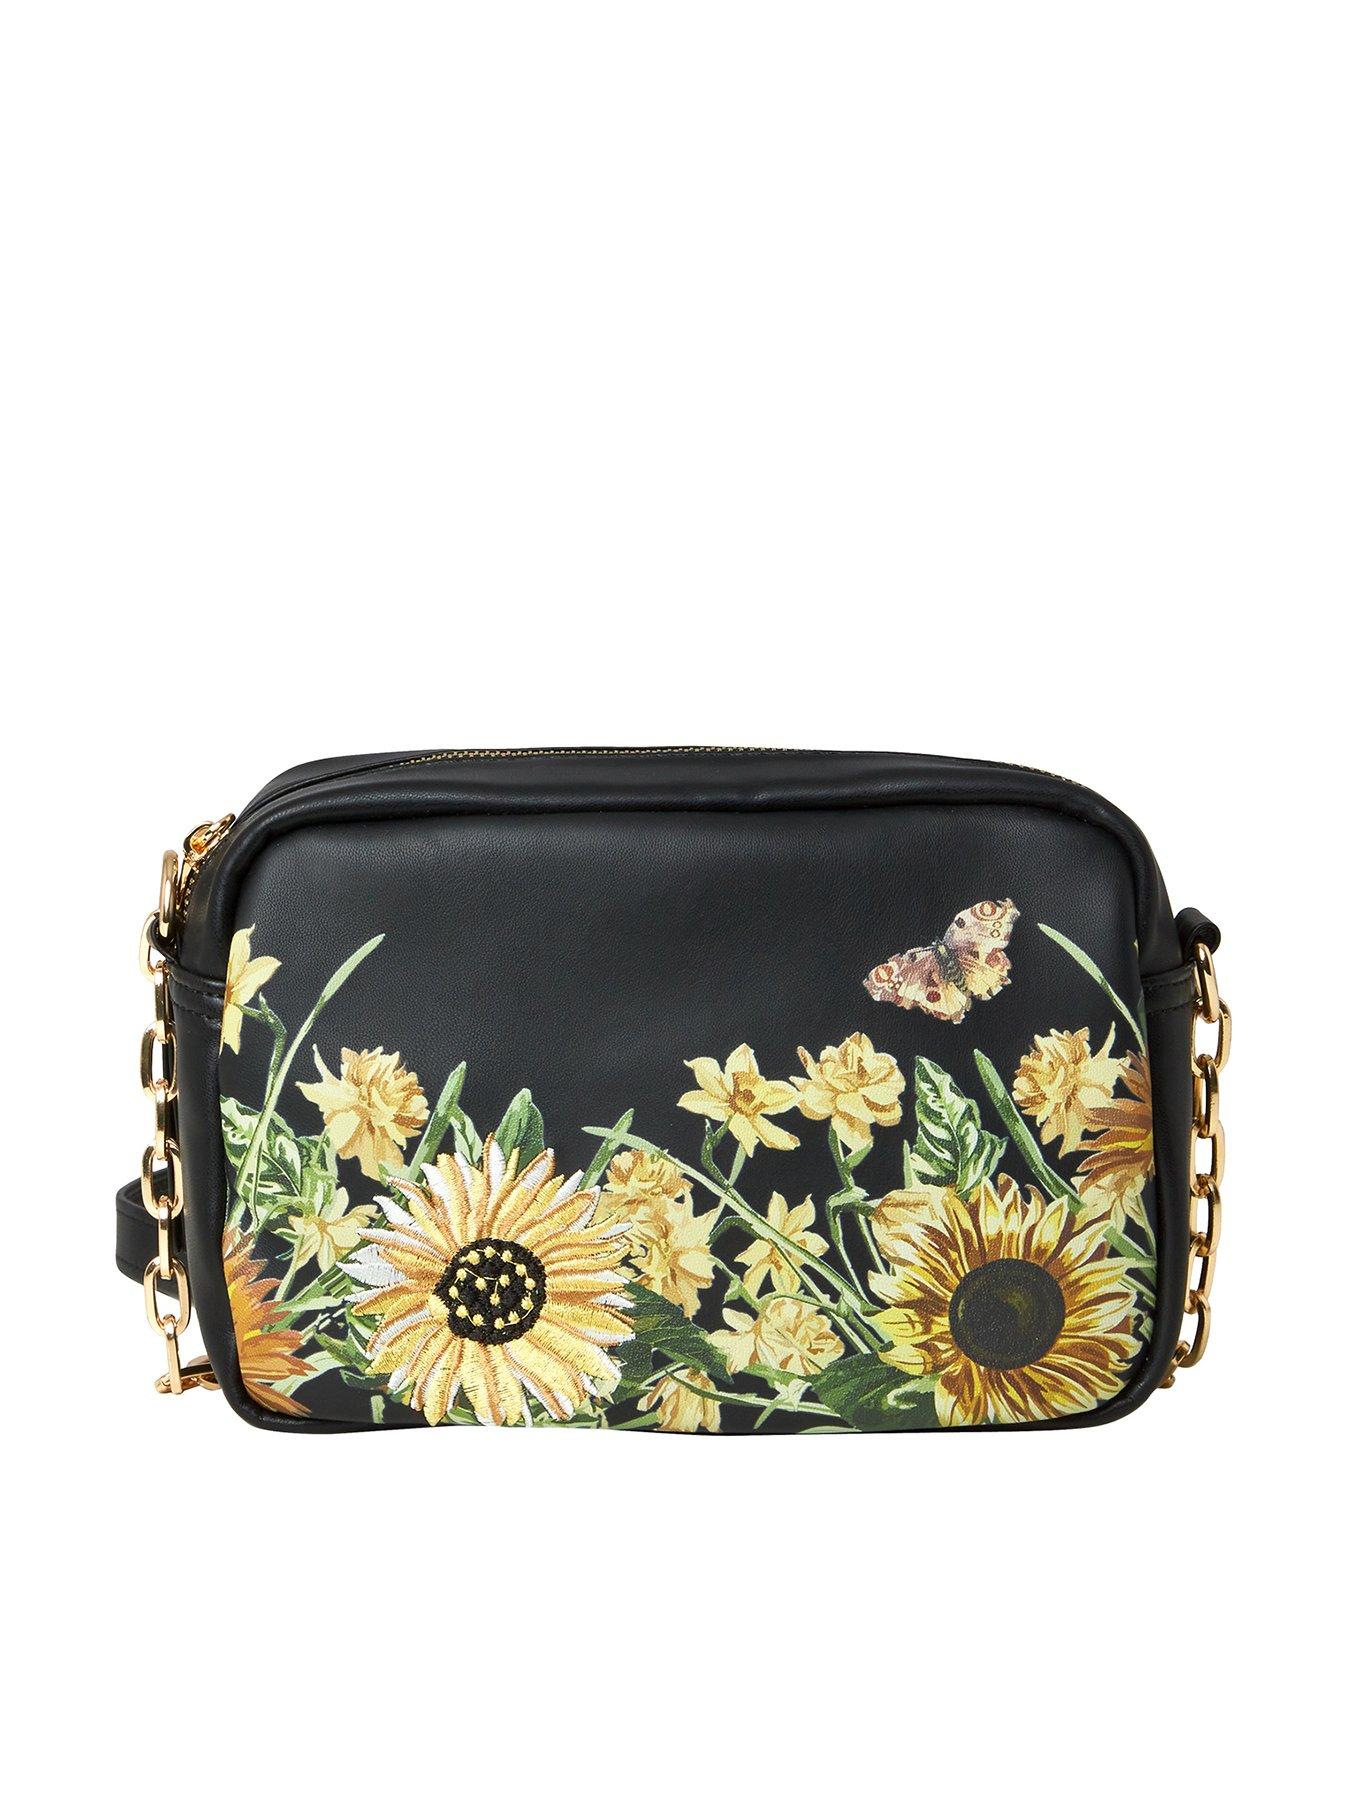 Bags & Purses Evening Sunflower Embroidered Bag -black Multi